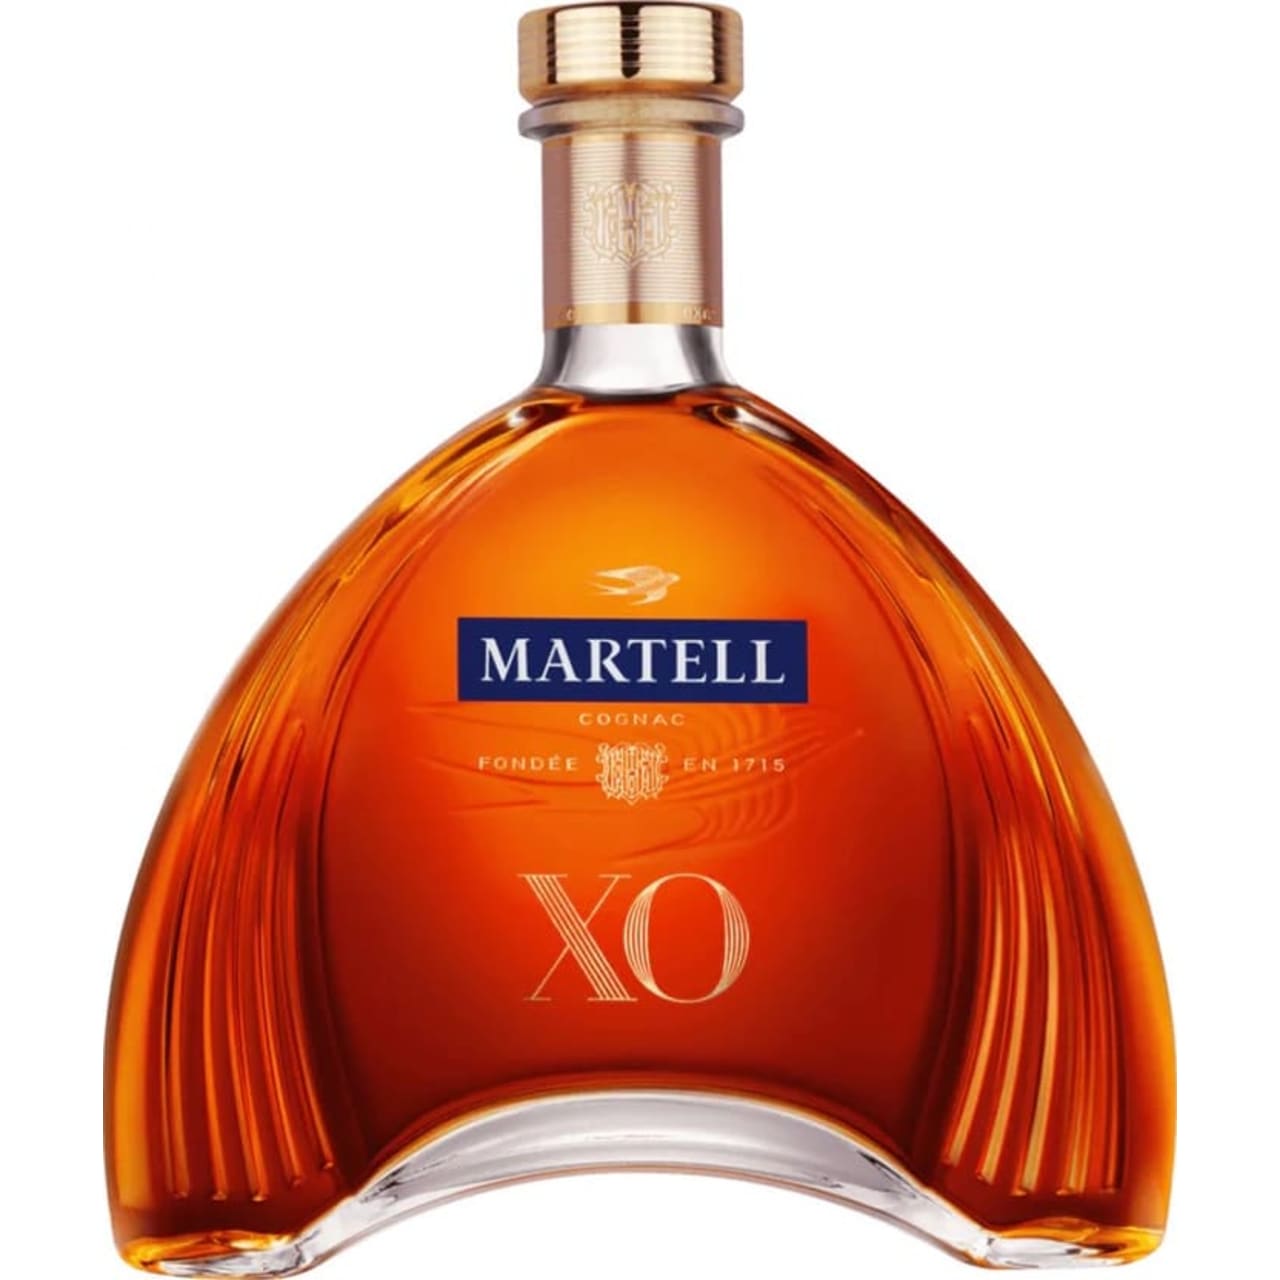 A terrific Cognac from Martell, this is a masterpiece of blending. Rich and with impressive depth, yet still elegant with subtle nuances and delicious texture.